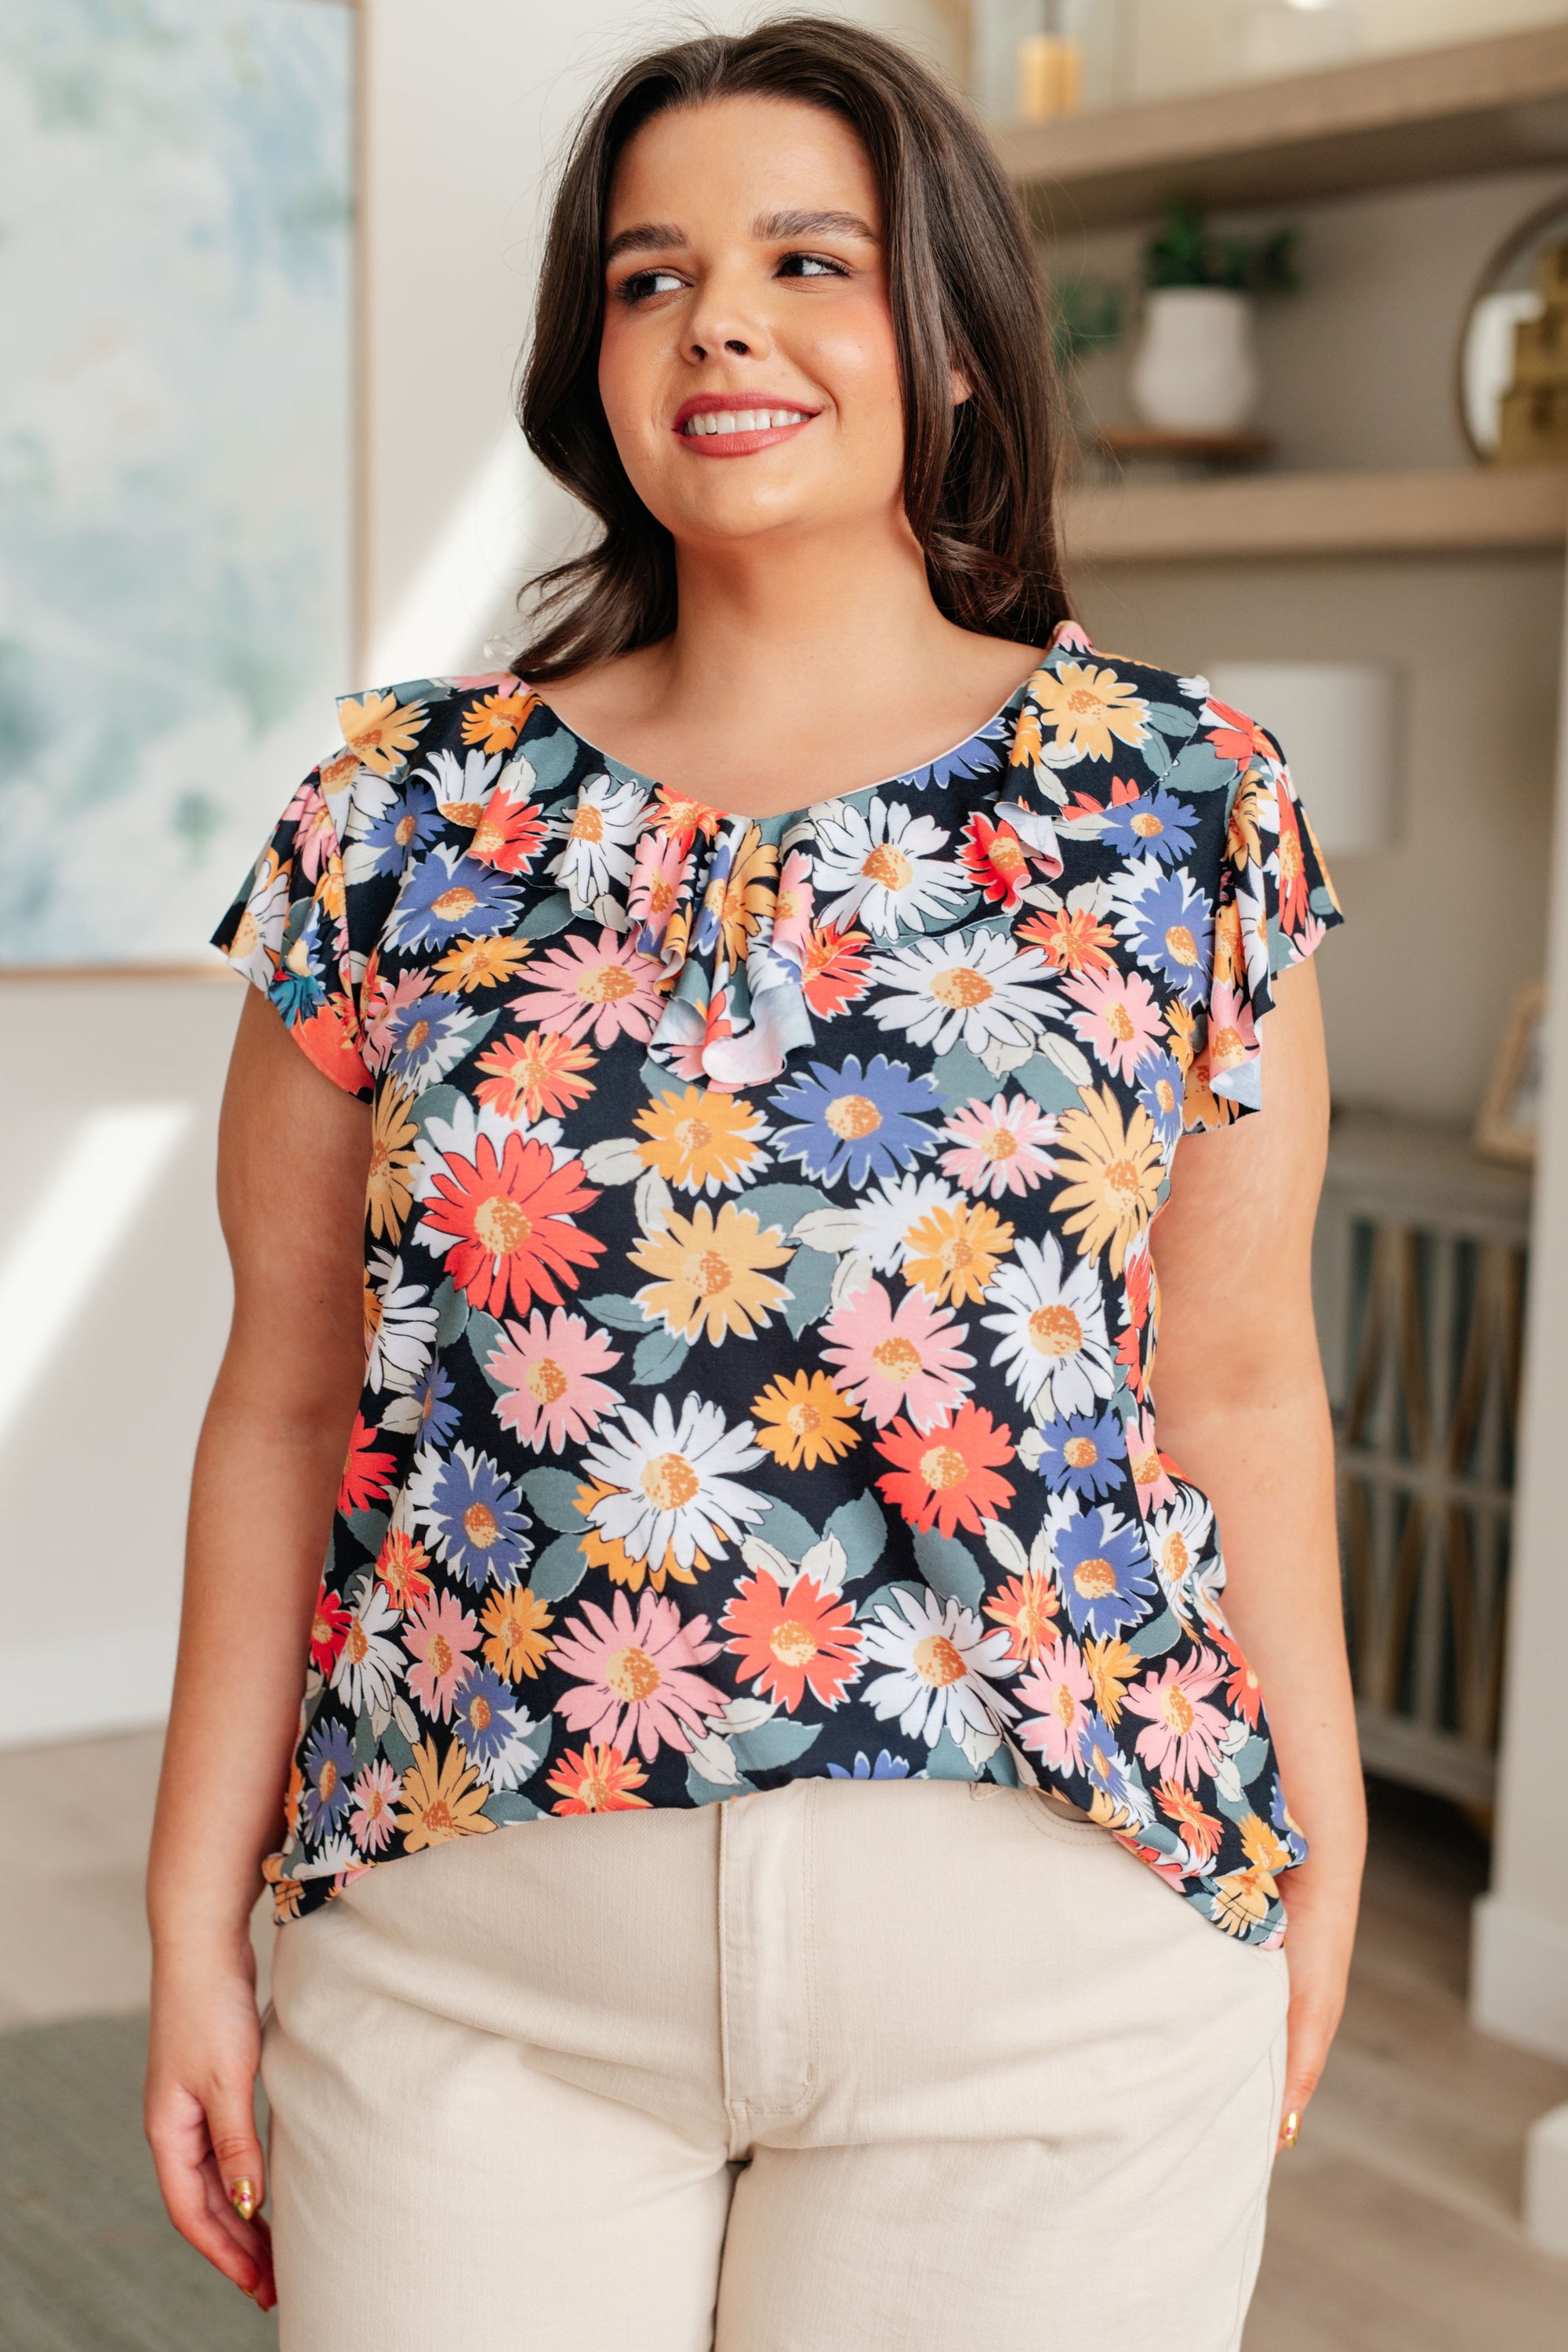 Explore More Collection - Flower Power Floral Top